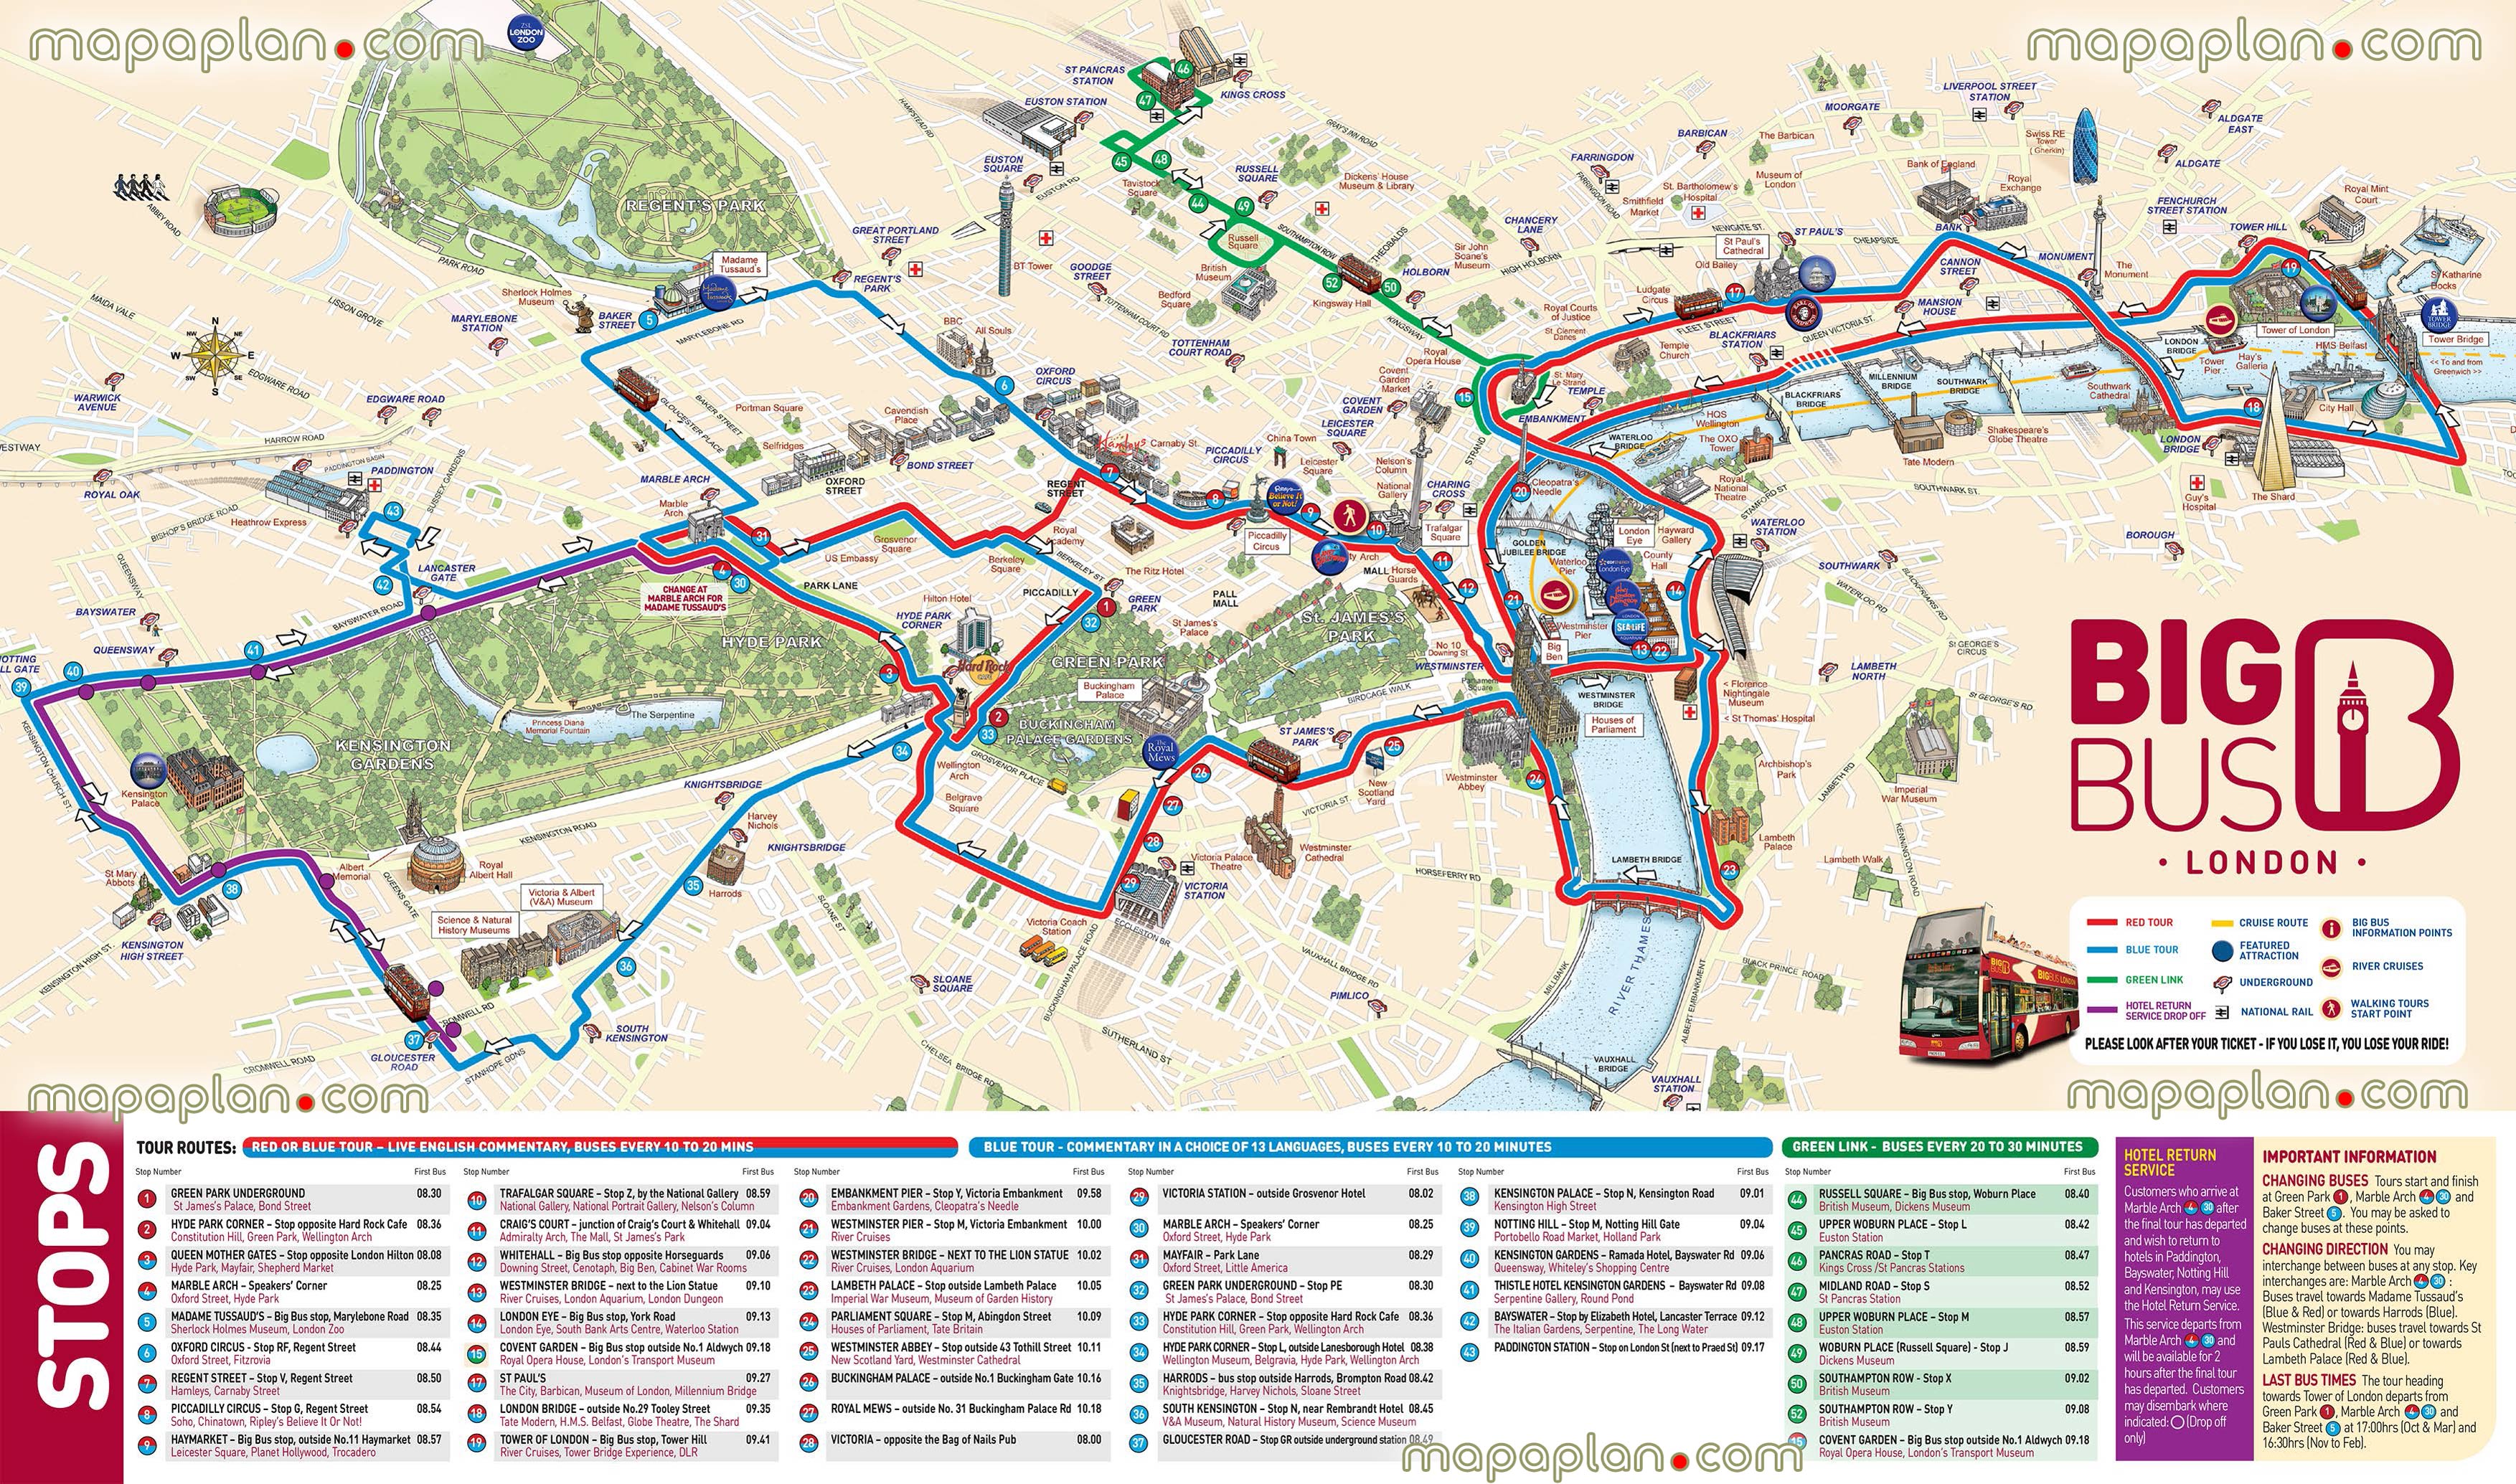 london maps - top tourist attractions - free, printable city